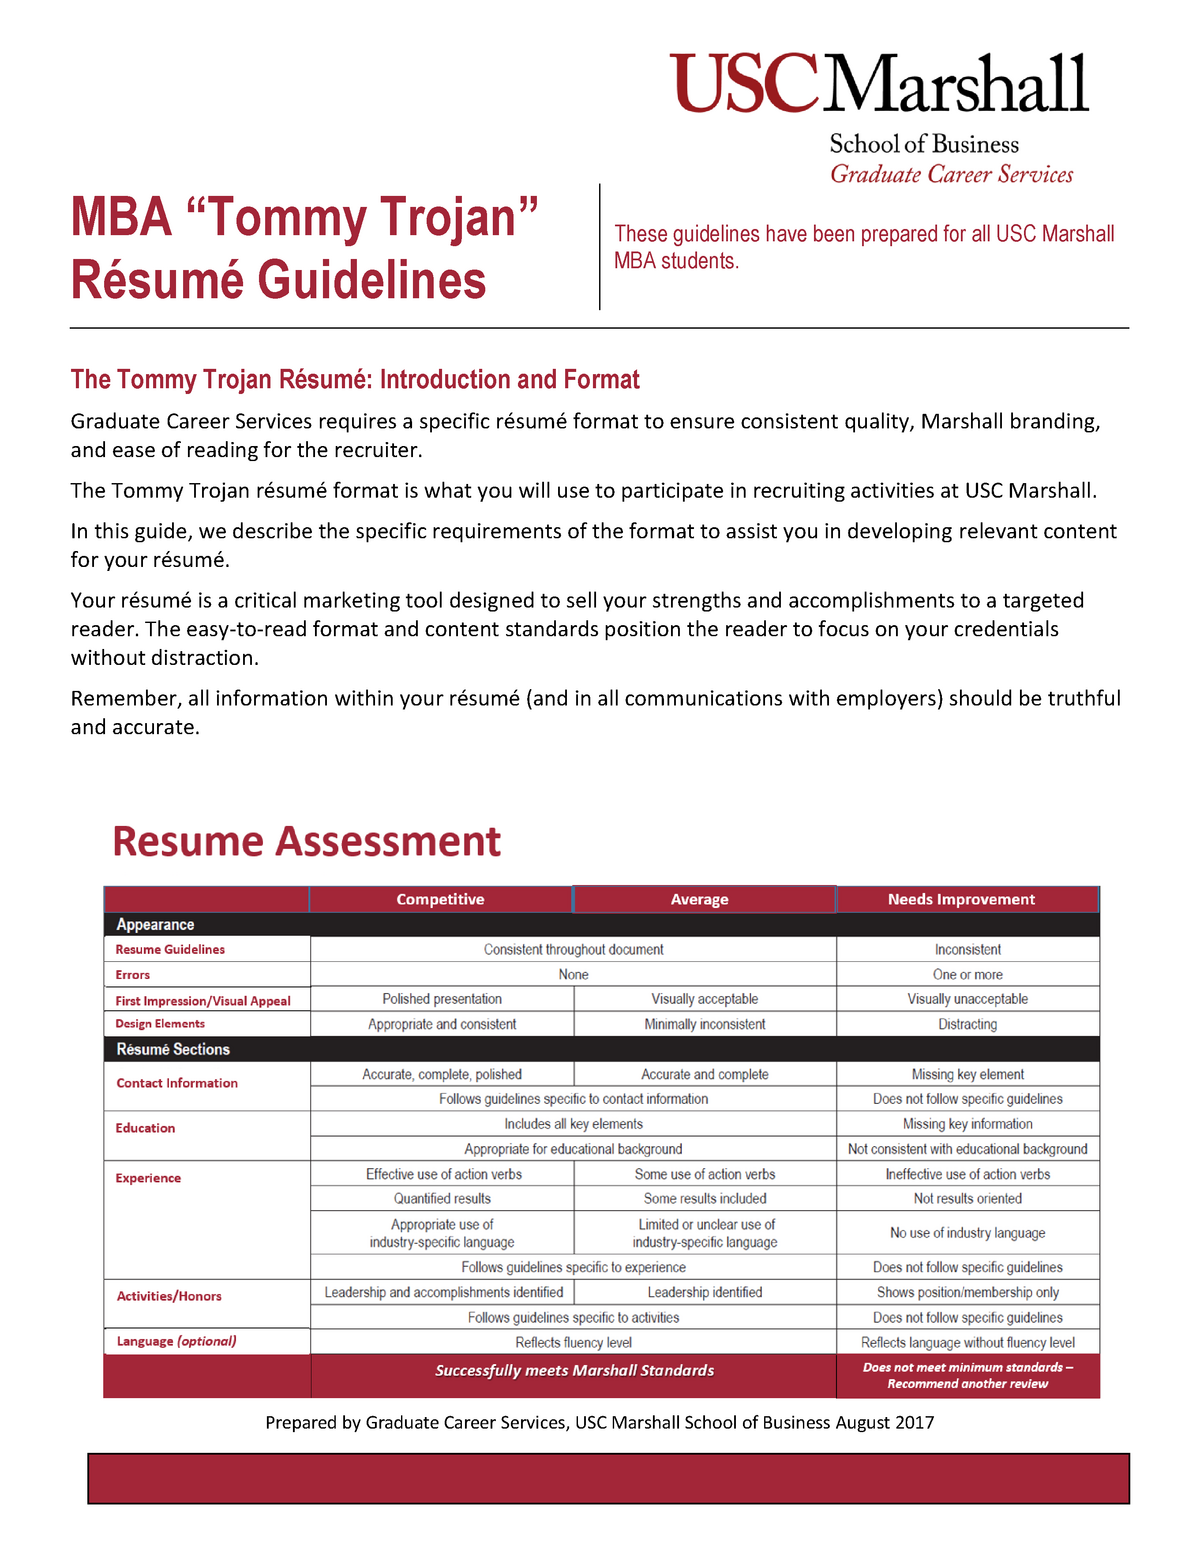 Tommy Trojan Resume Guidelines Prepared by Graduate Career Services, USC Marshall School of